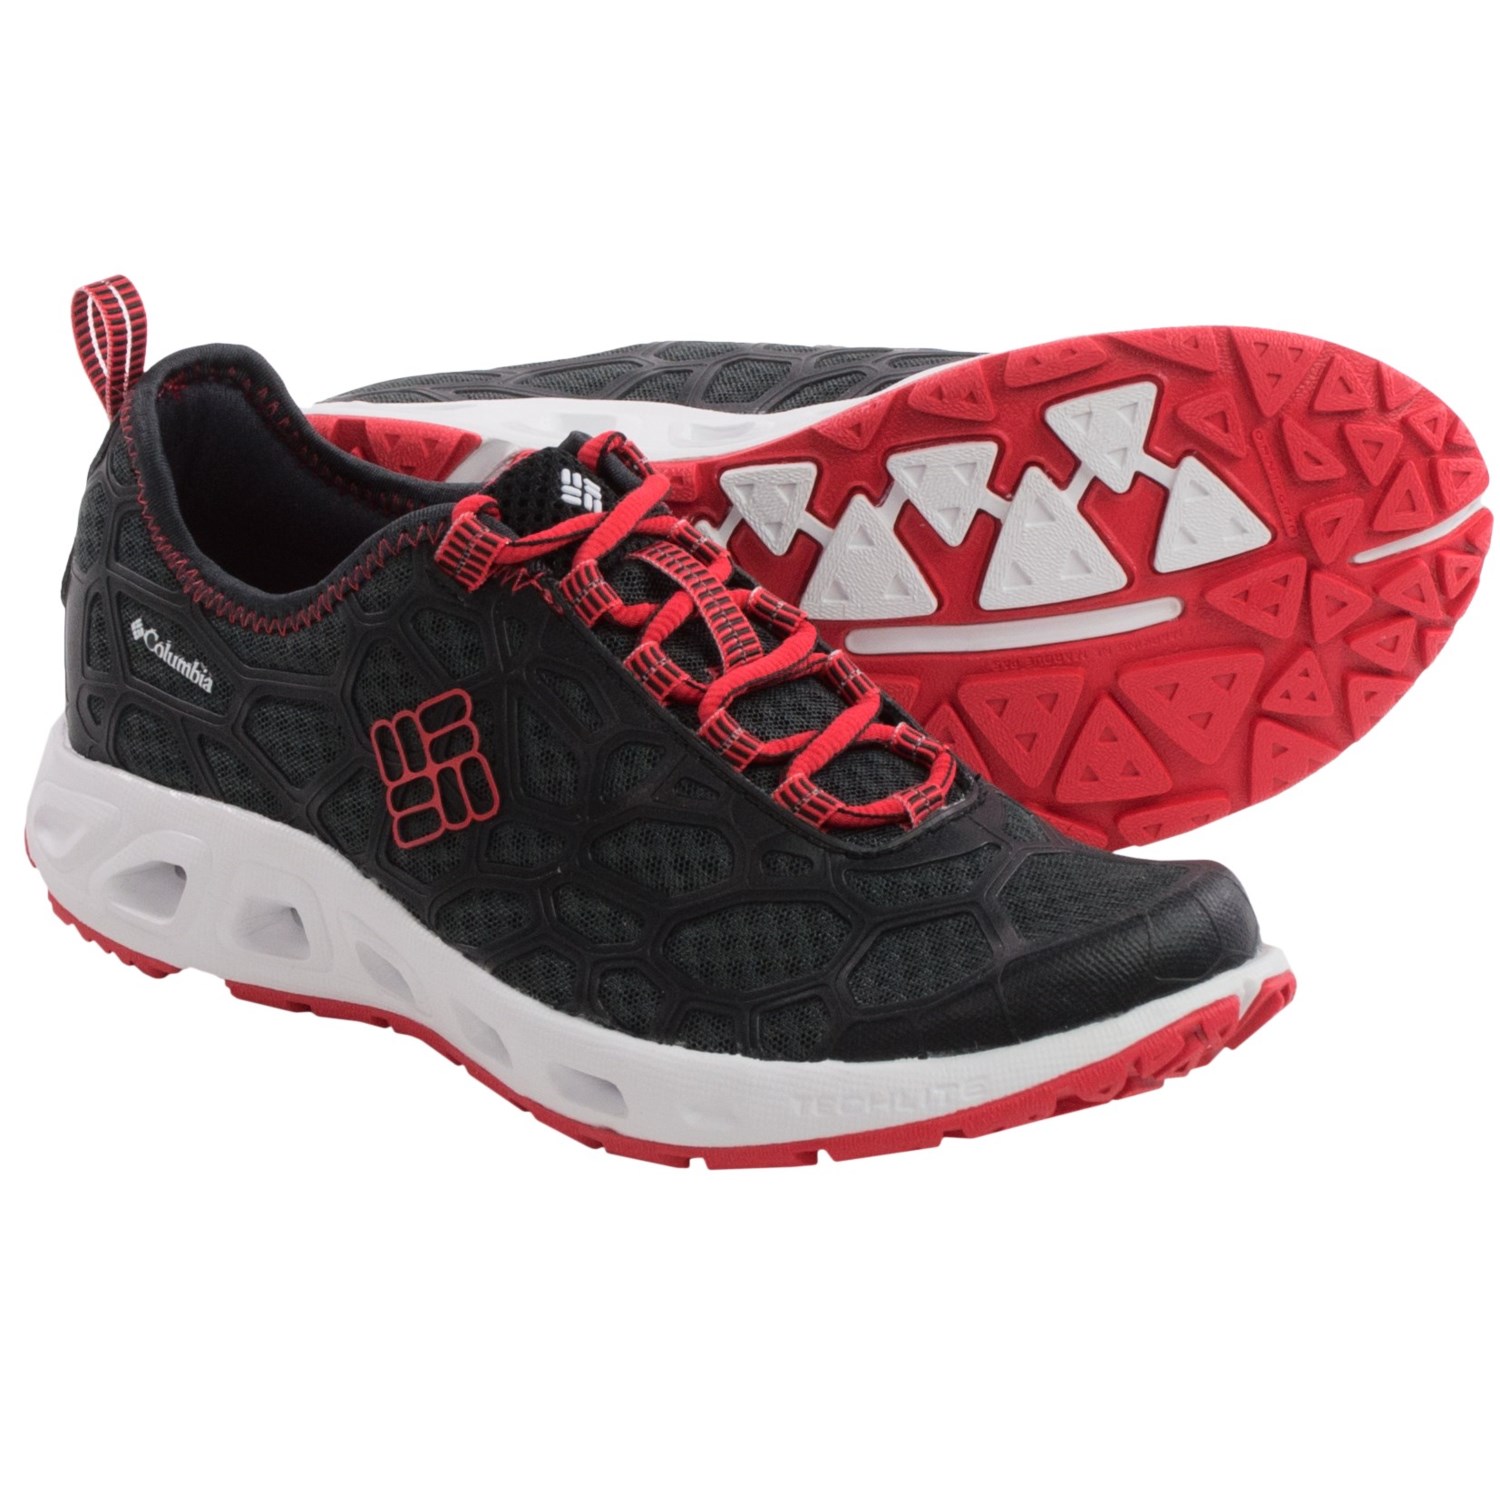 Columbia Sportswear Megavent Water Shoes (For Women)